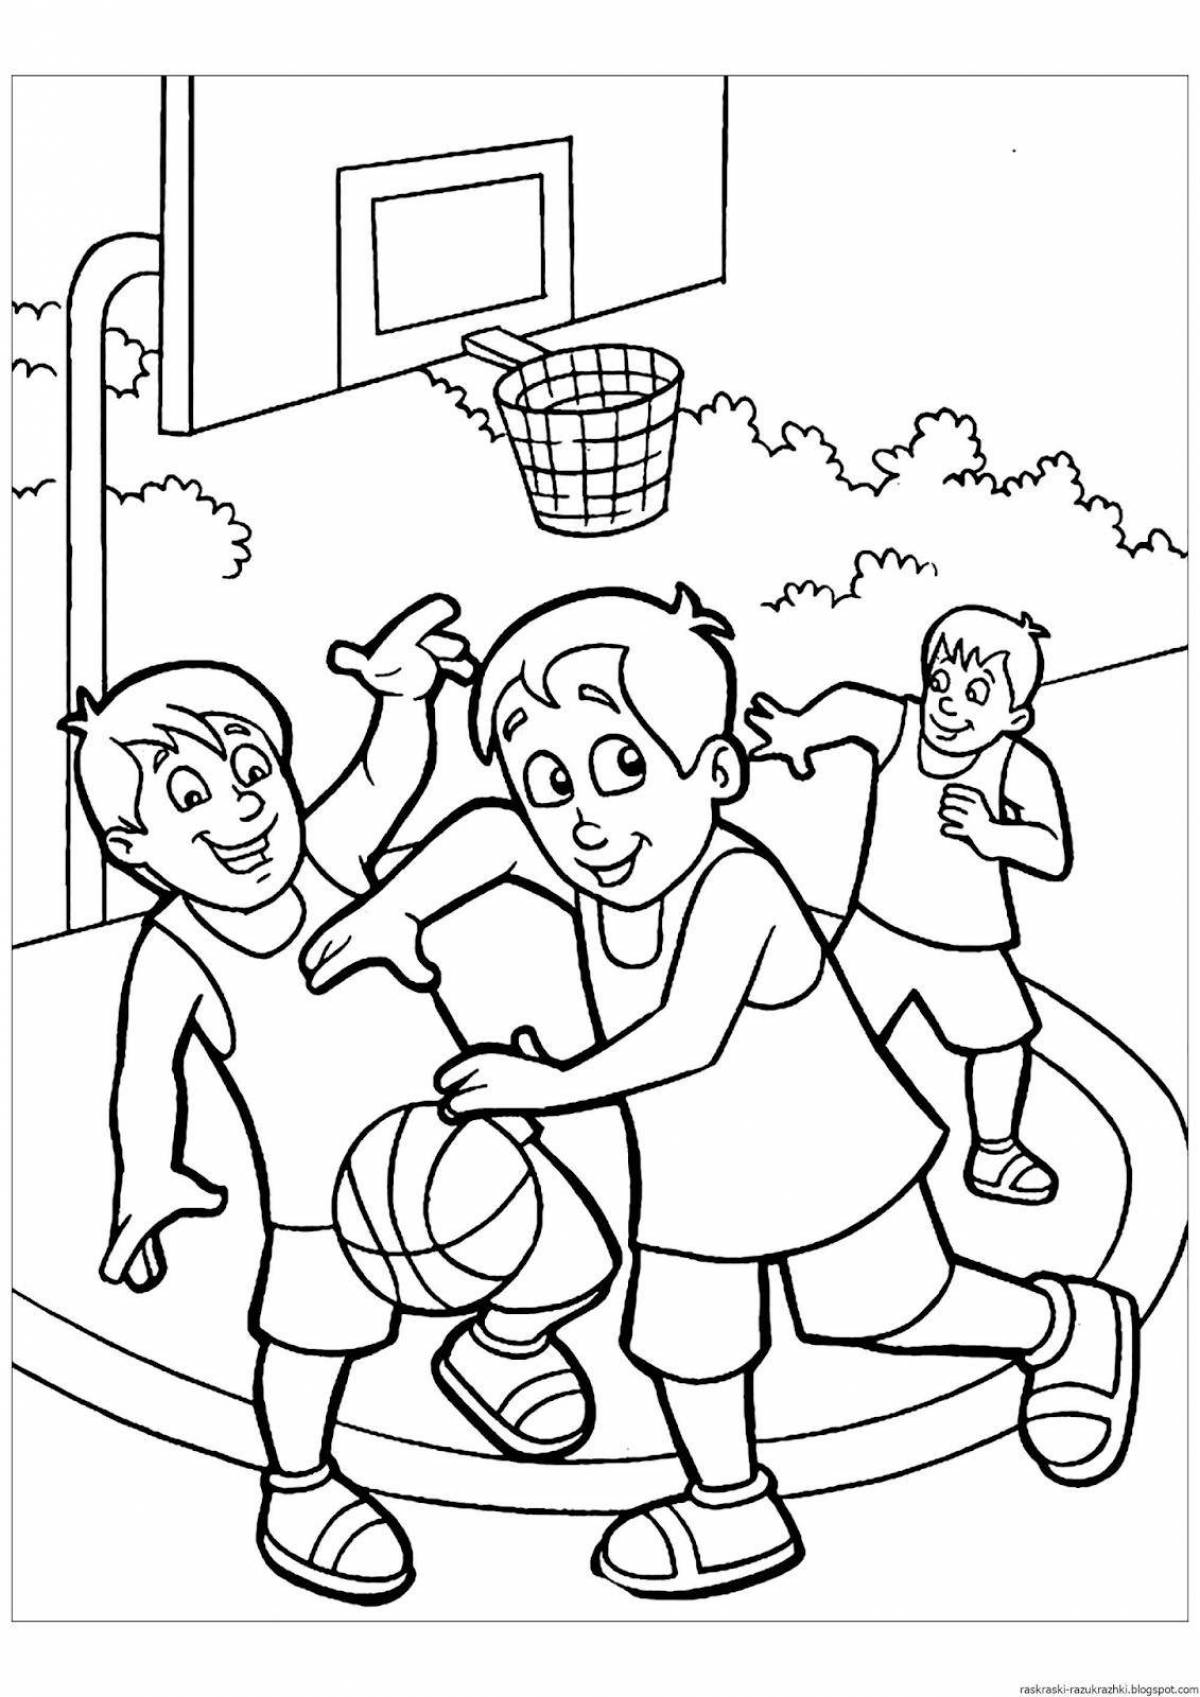 Recreational physical education grade 1 coloring